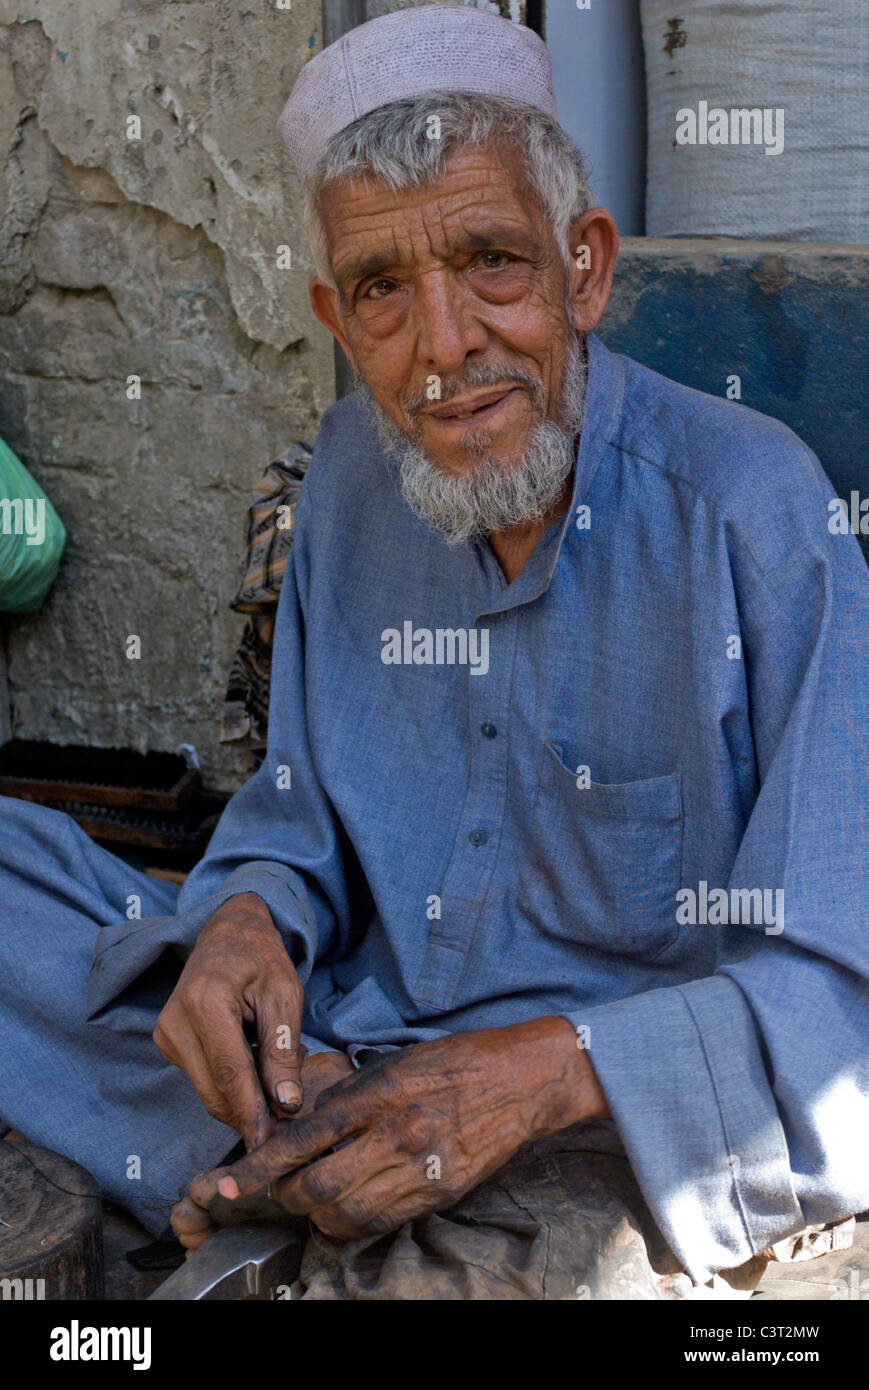 A vendor in the Old City. Stock Photo